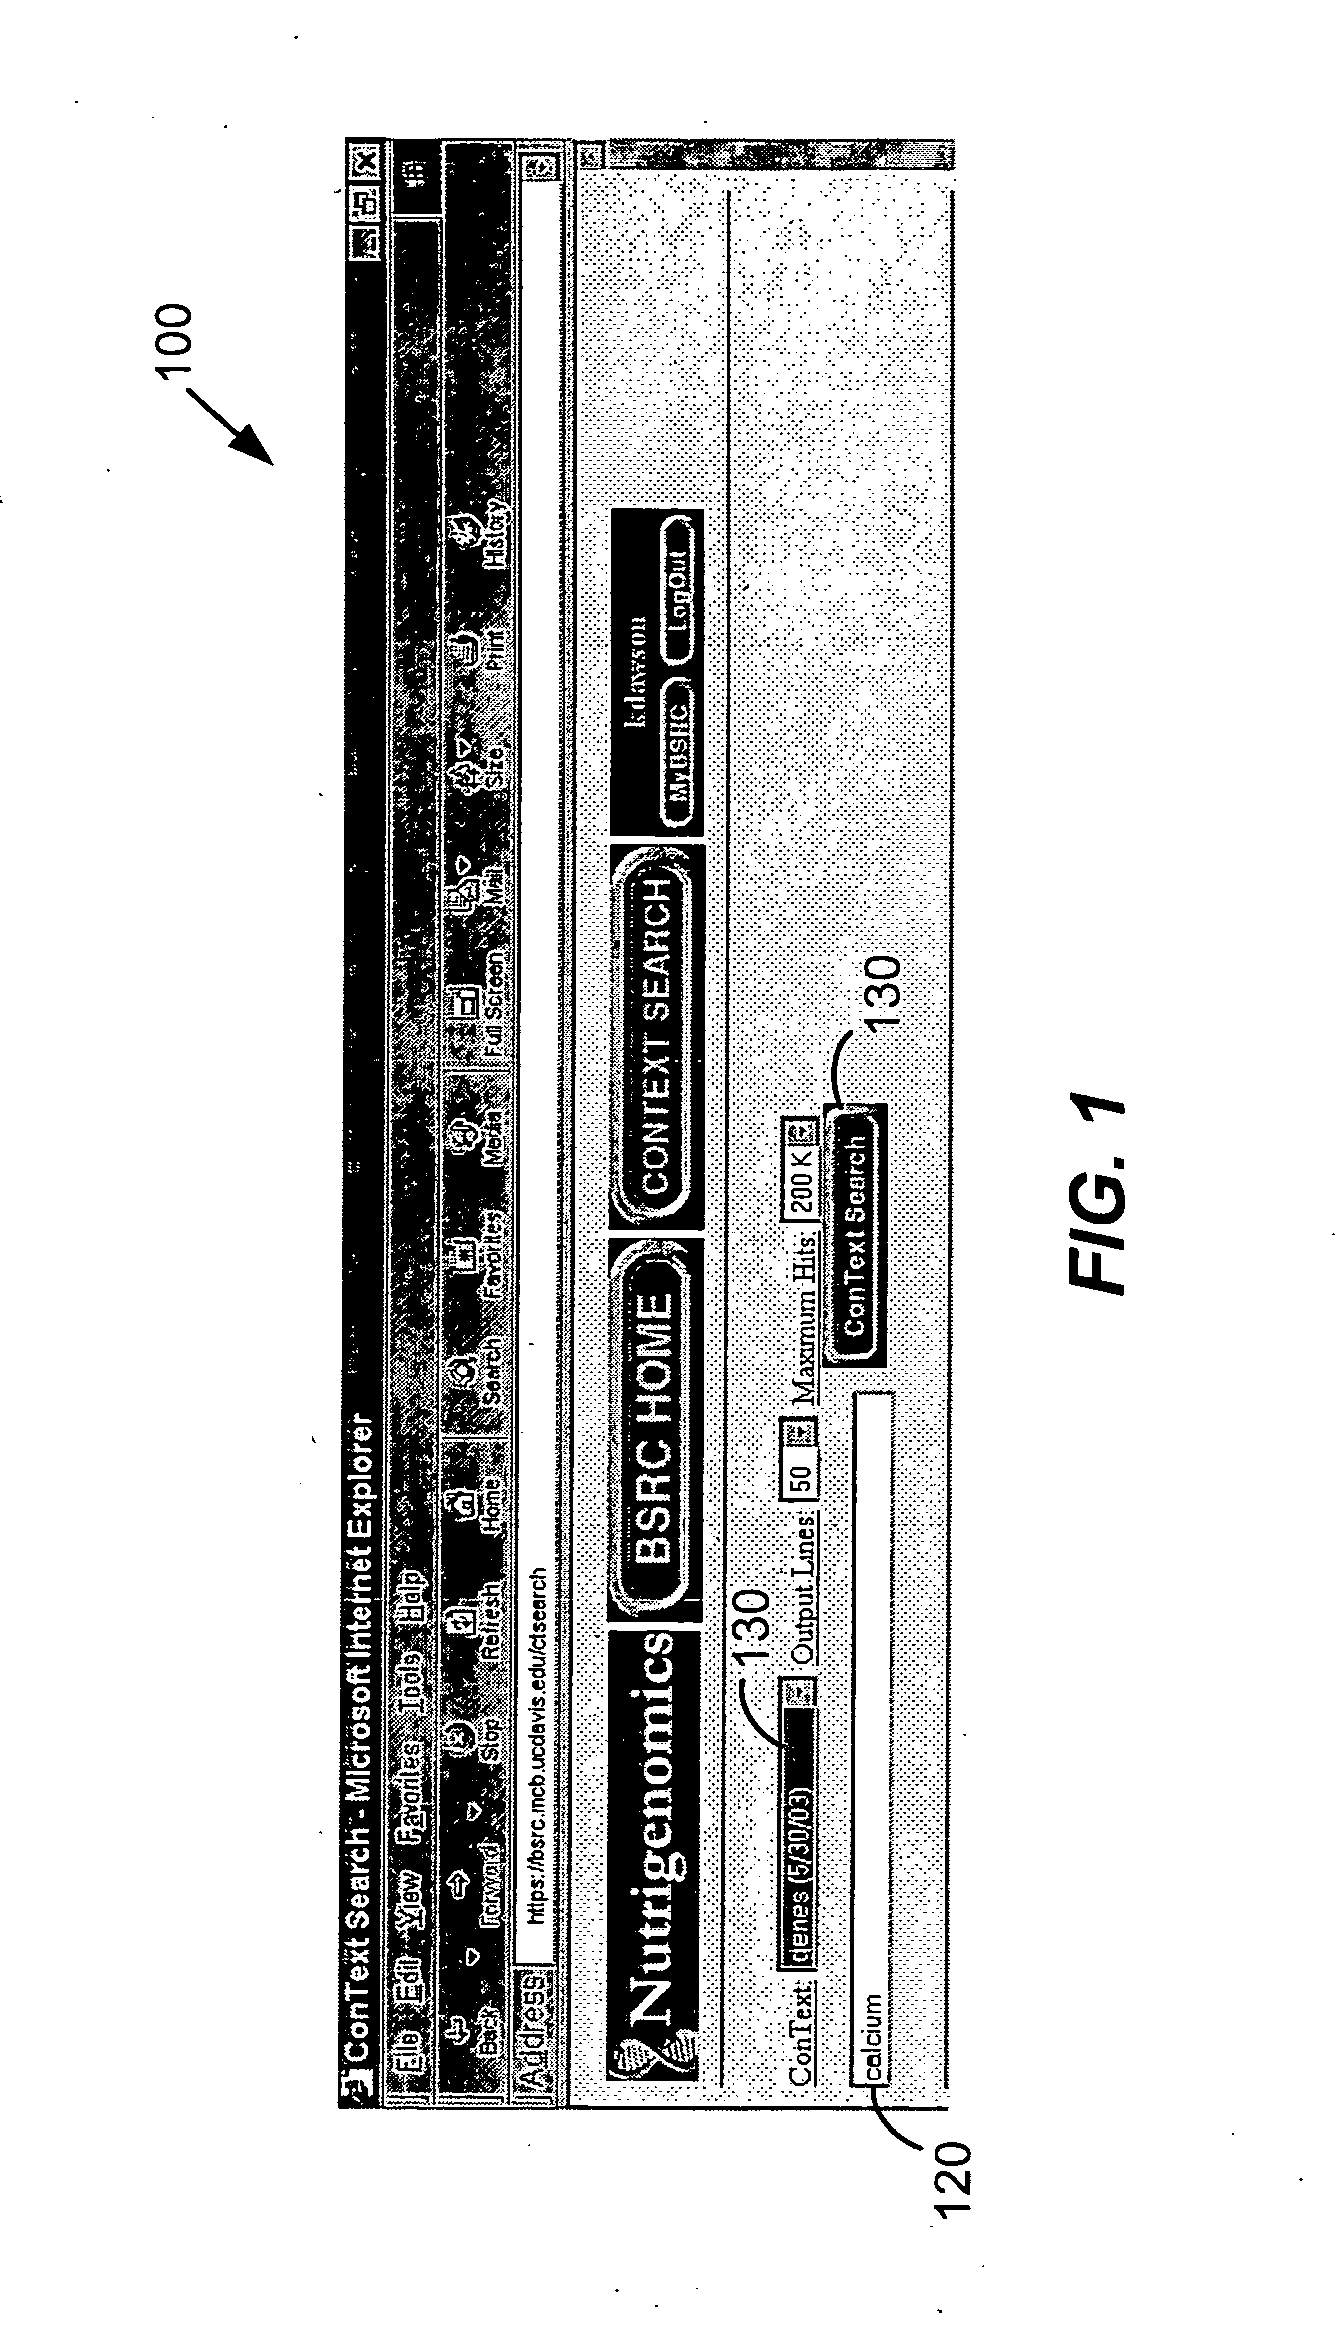 System and method of context-specific searching in an electronic database